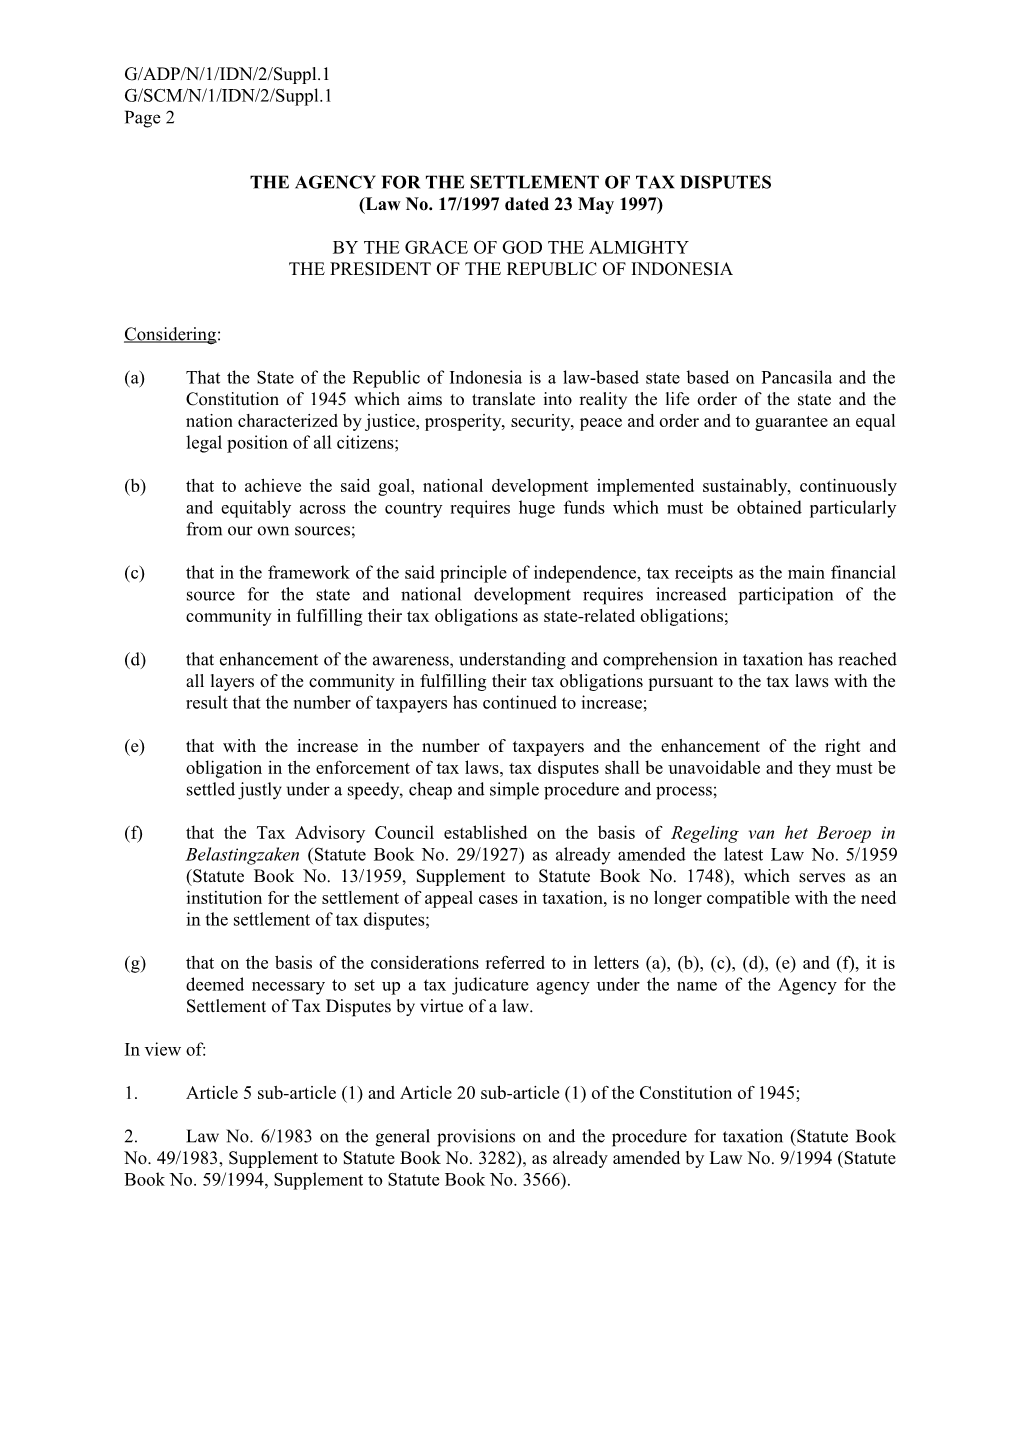 Notification of Laws and Regulations